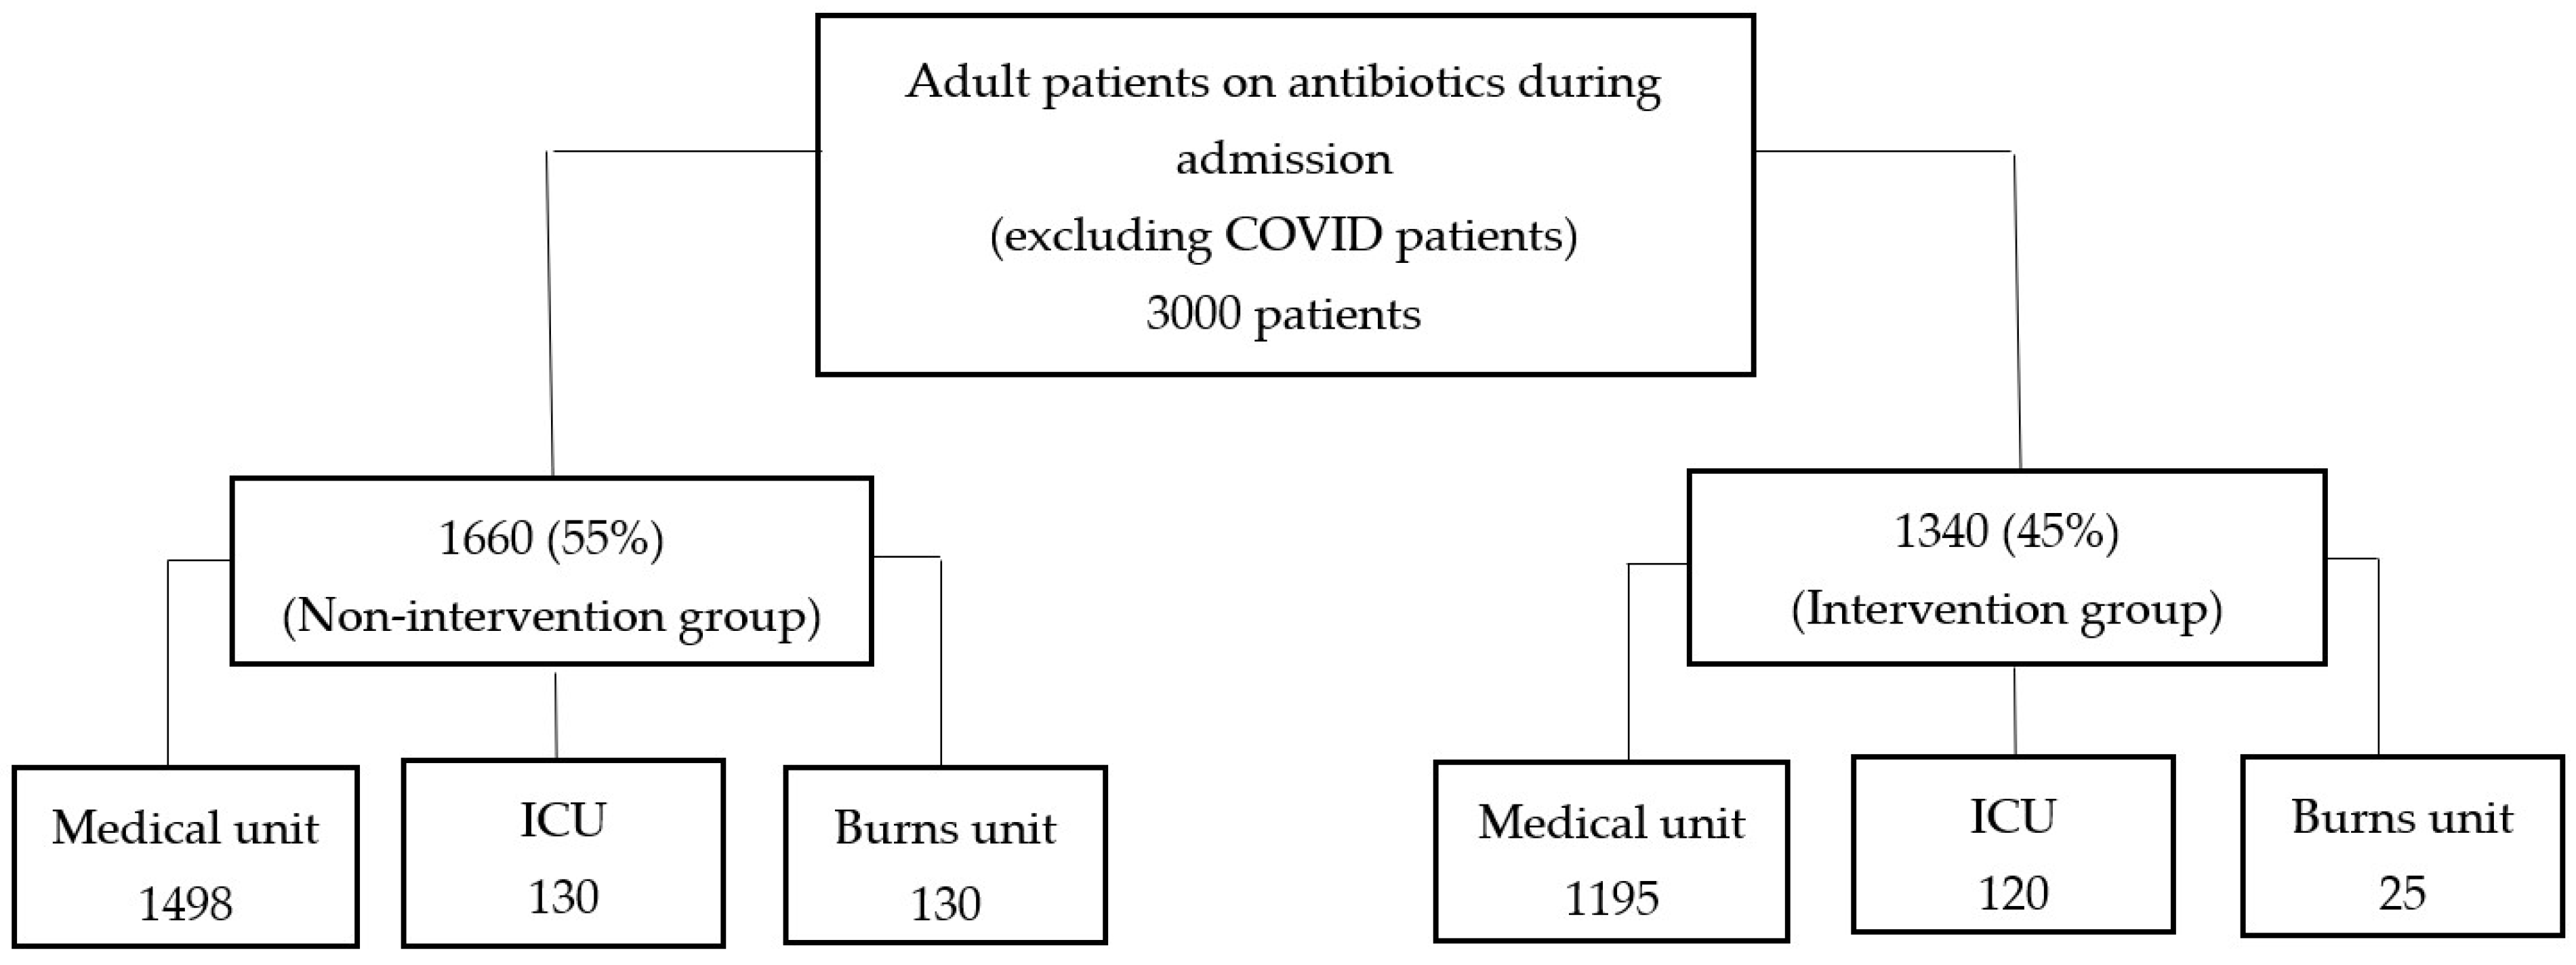 ATC code and DDD/100 bed-days of the commonly prescribed drugs in the ICU.